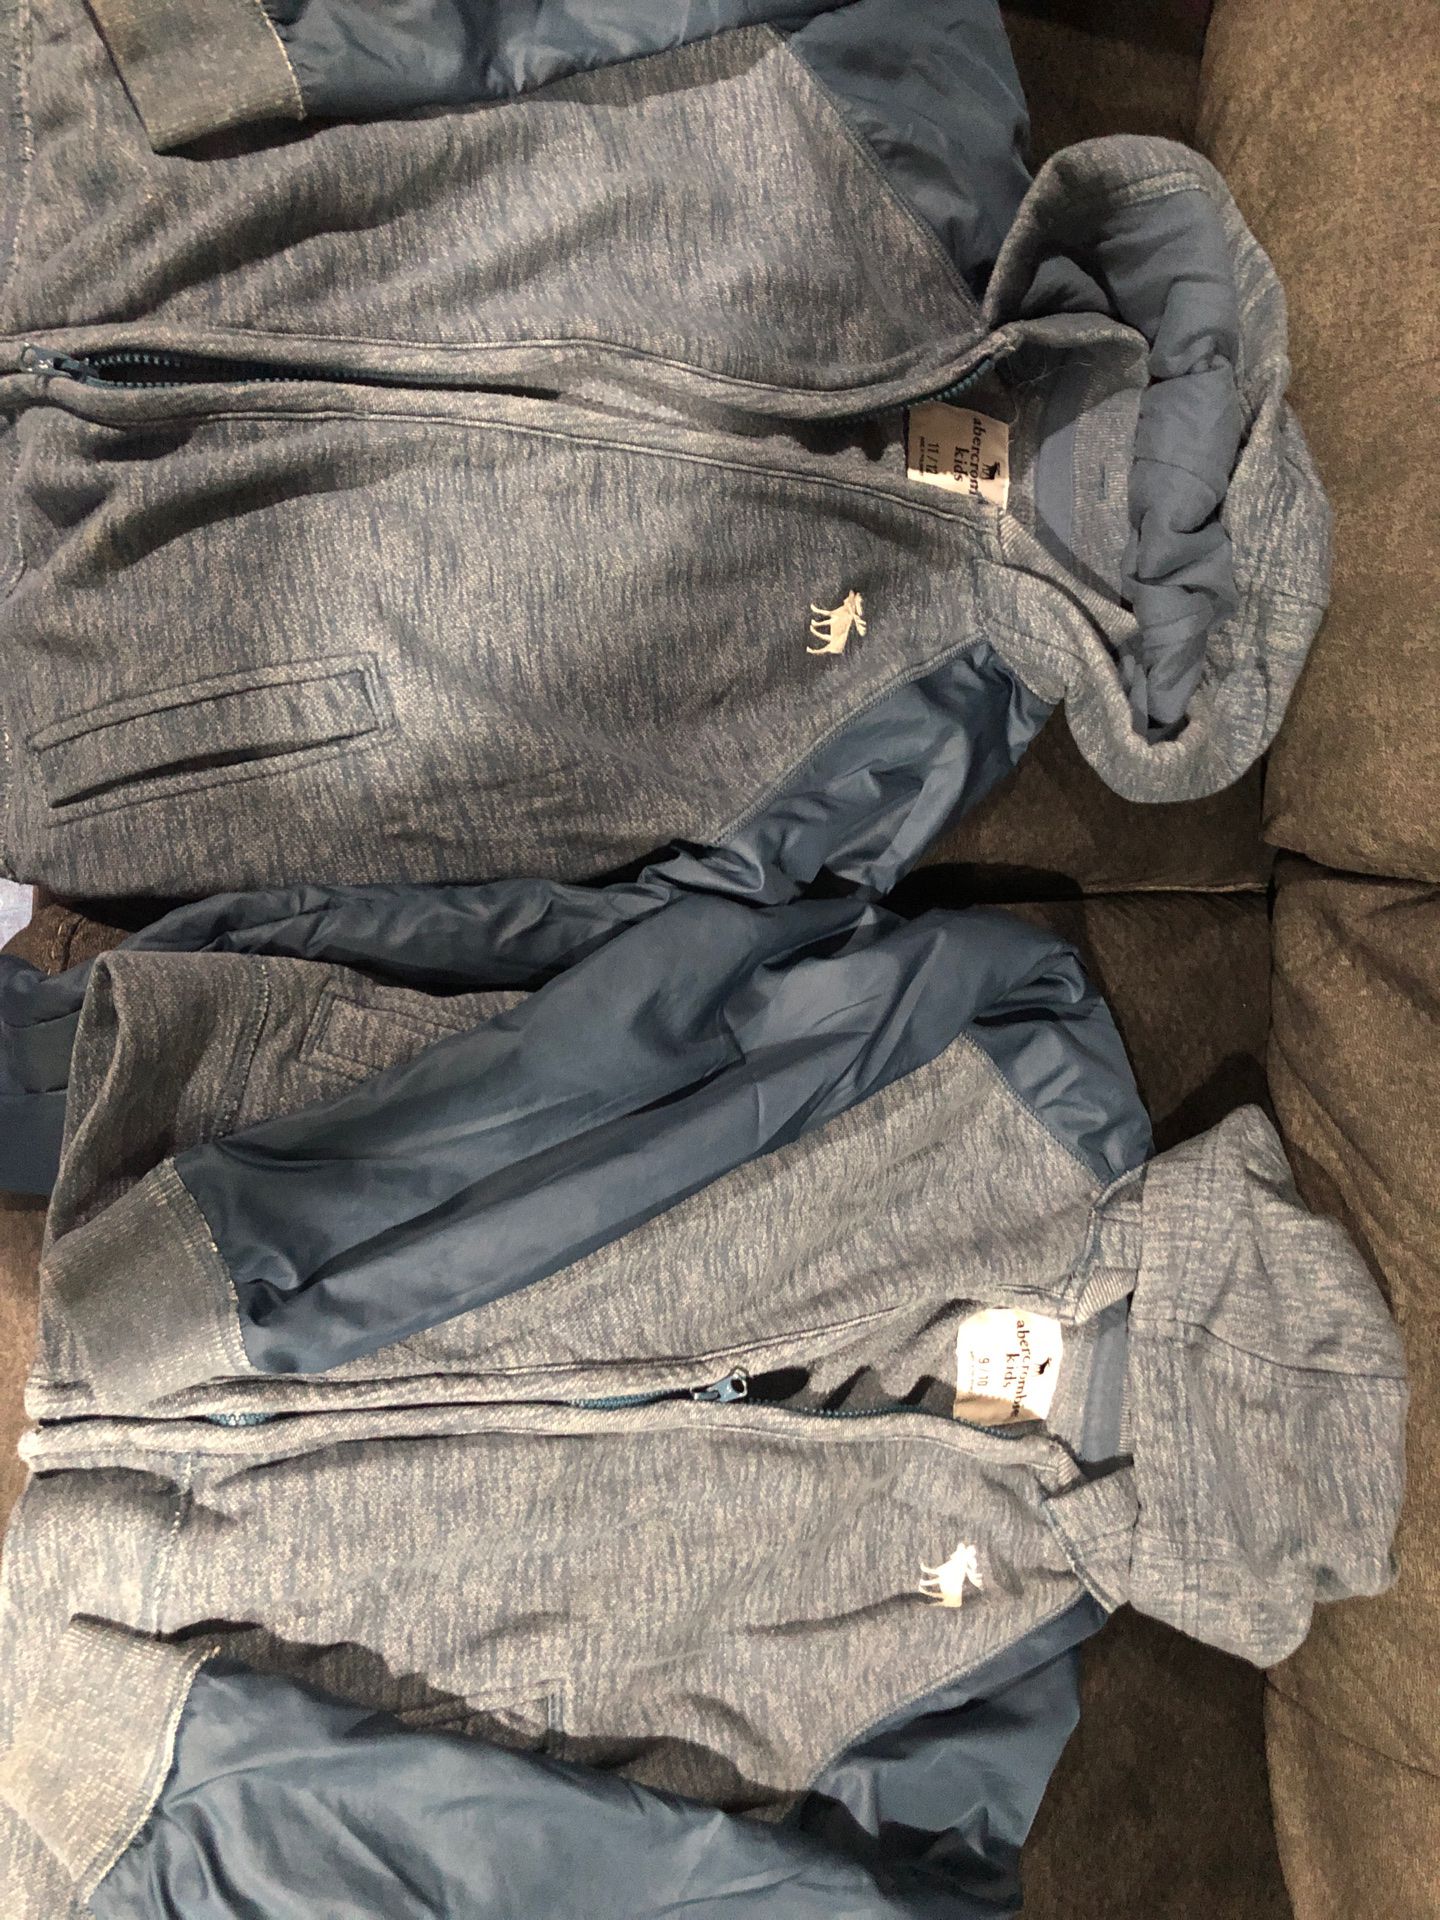 Abercrombie hoodie jackets sizes 11/12 & 9/10